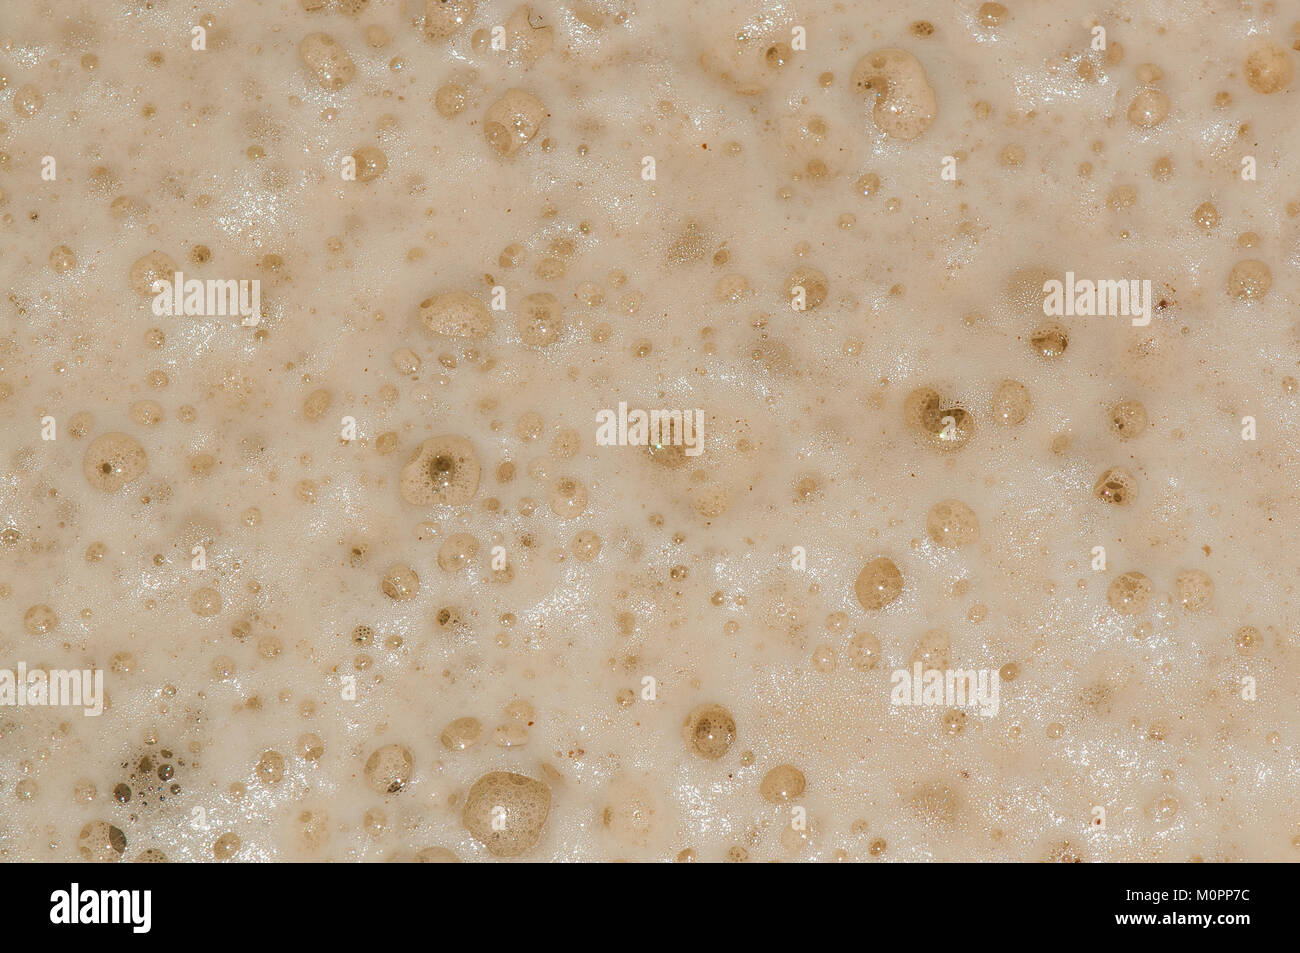 close-up view beer foam with bubbles Stock Photo